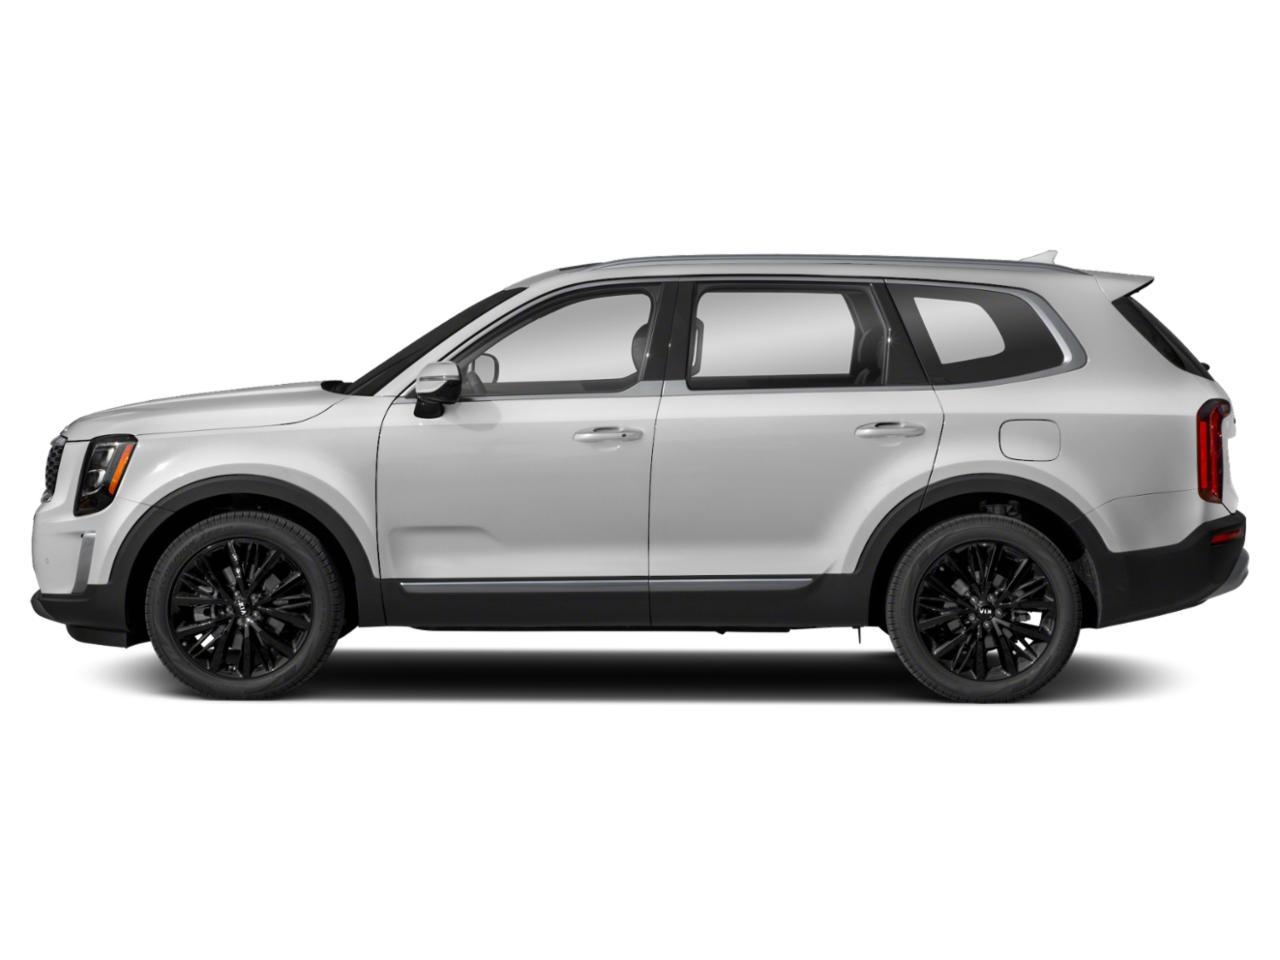 2021 Kia Telluride for sale in Reidsville - 5XYP5DHC5MG167136 ...